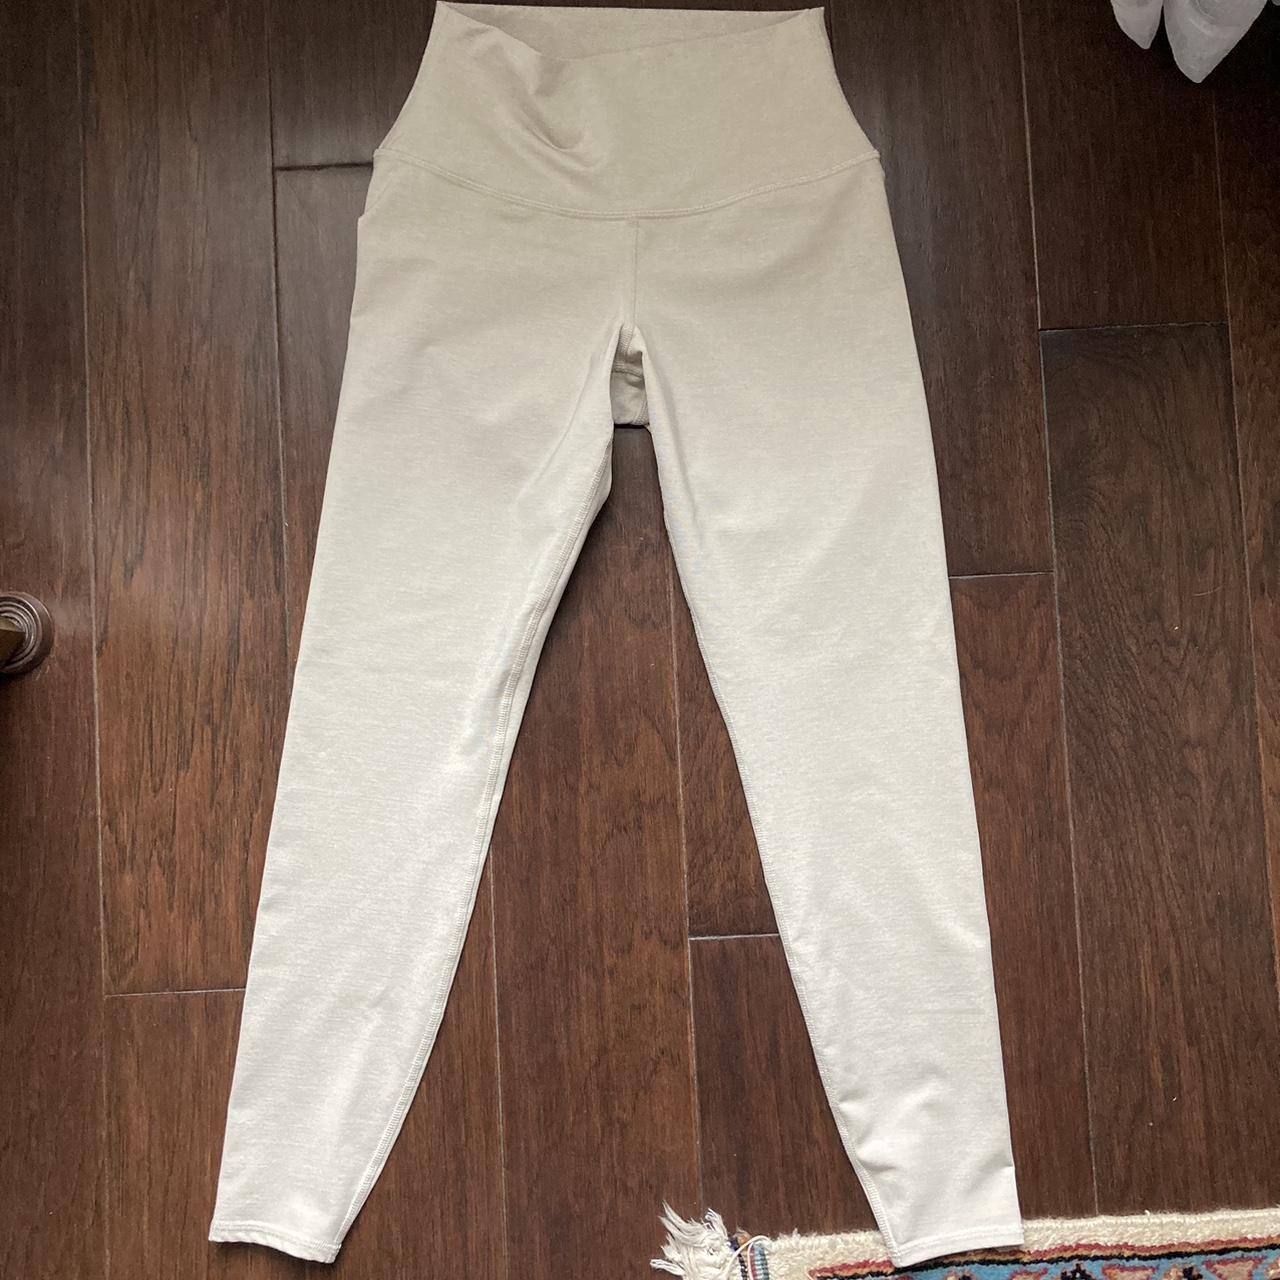 White Alo yoga pants that are oh sooo flattering! - Depop